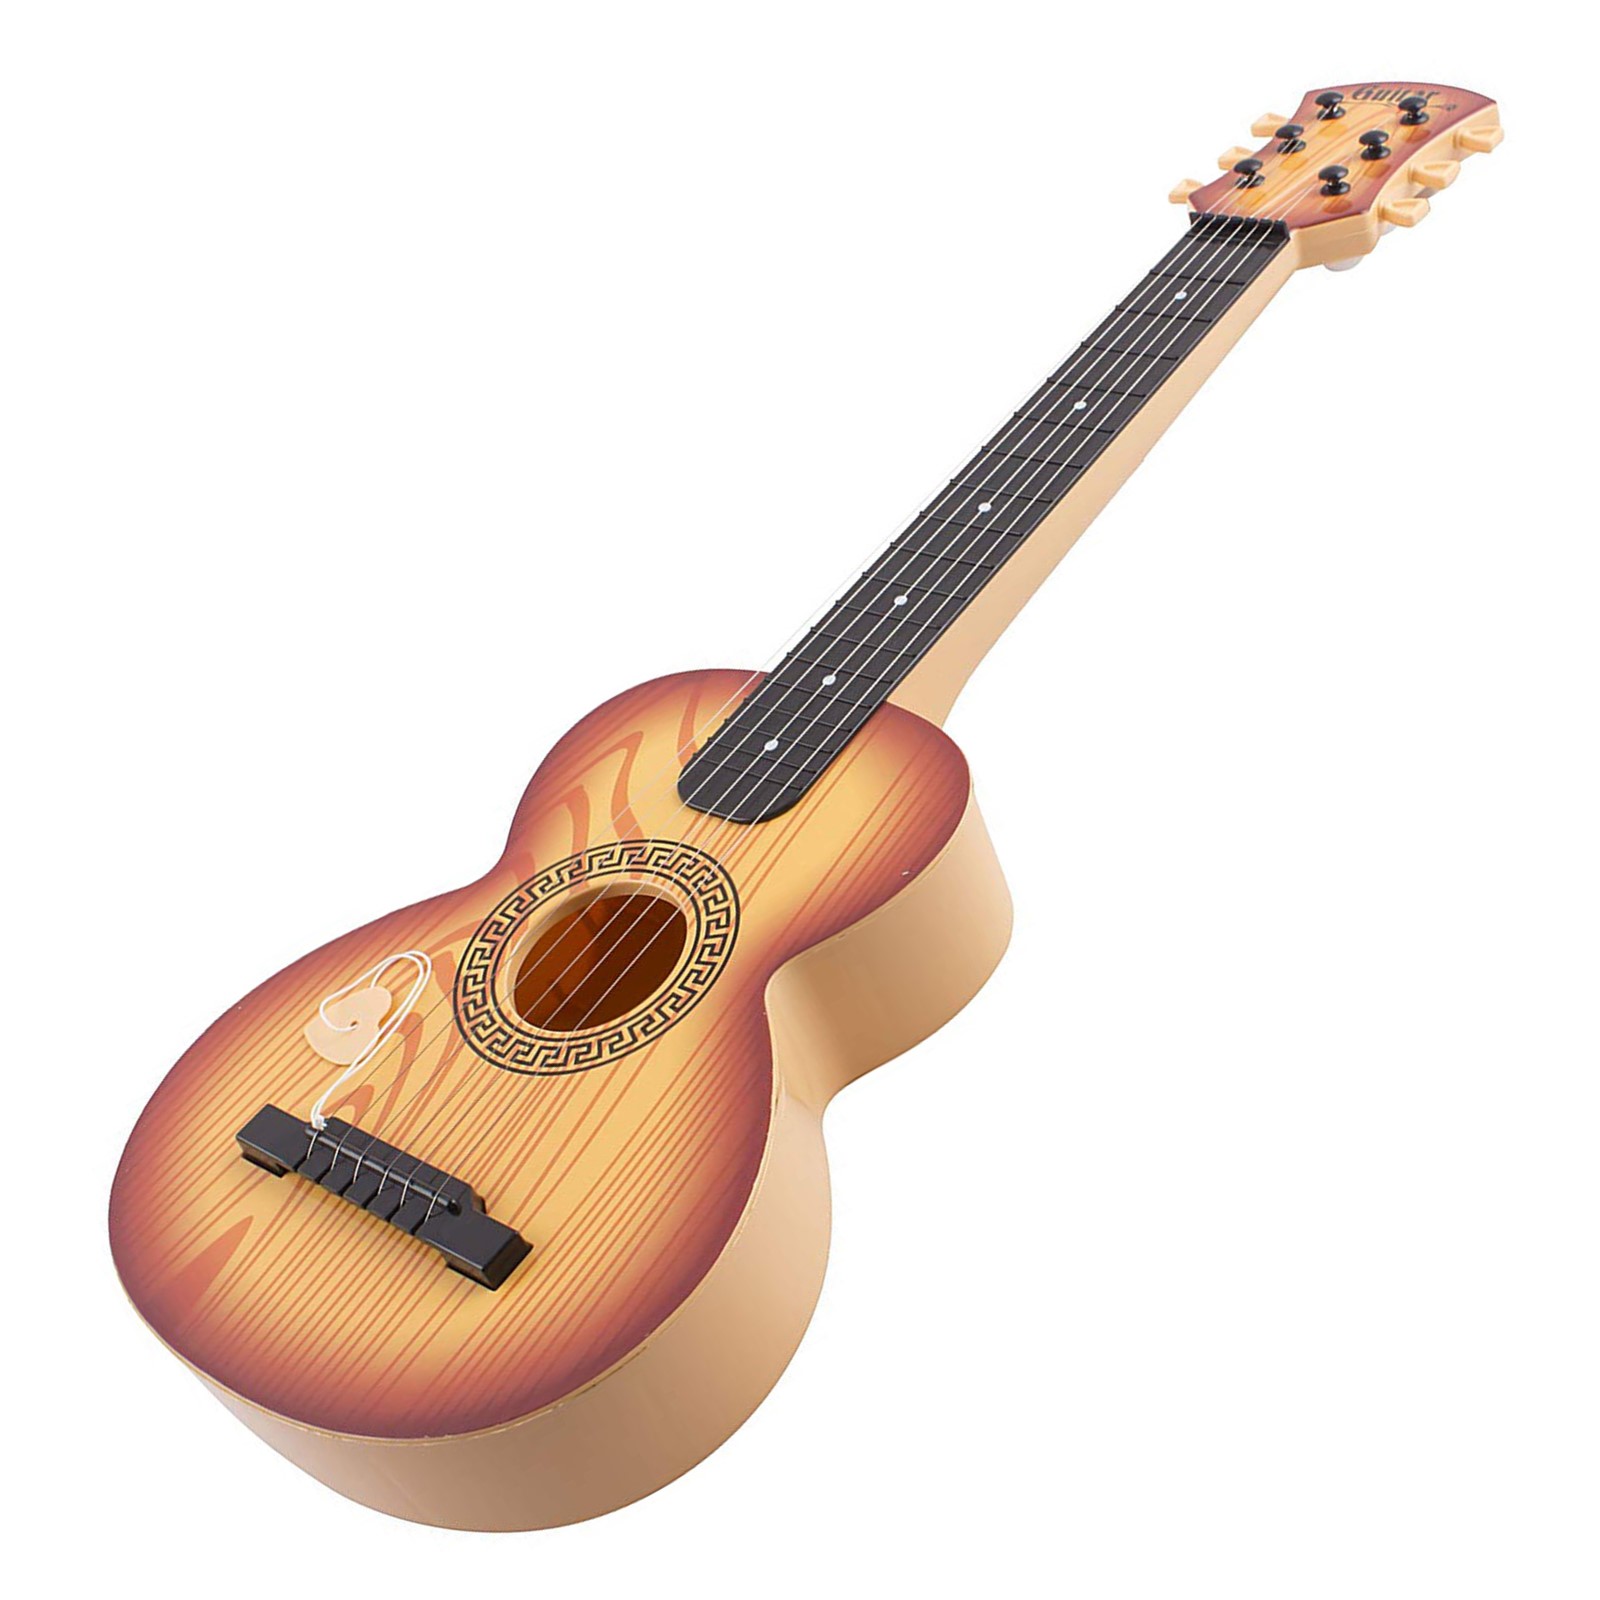 Toy Guitar Rock Star 6 String Acoustic Kids 25.5” Ukulele With Guitar Pick Children's Musical Instrument Vibrant Sound And Color Tunable Perfect For Learning How To Play Educational Light Brown